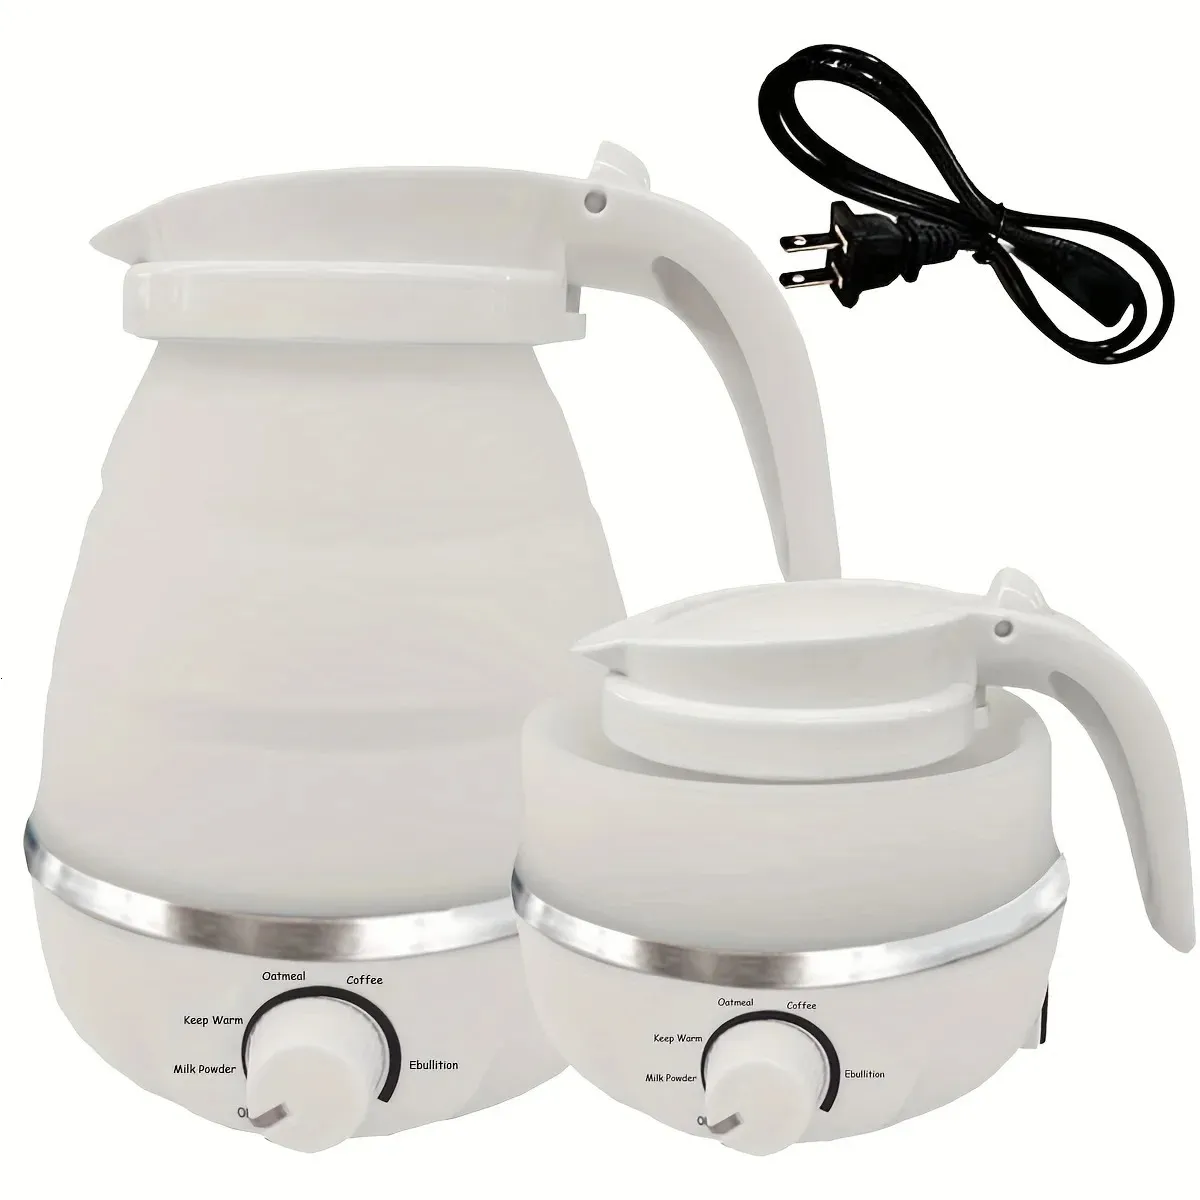 Foldable And Portable Teapot Water Heater 0.6L 600W 110/220V Electric Kettle For Travel And Home Tea Pot Water Kettle Silica Gel 240228